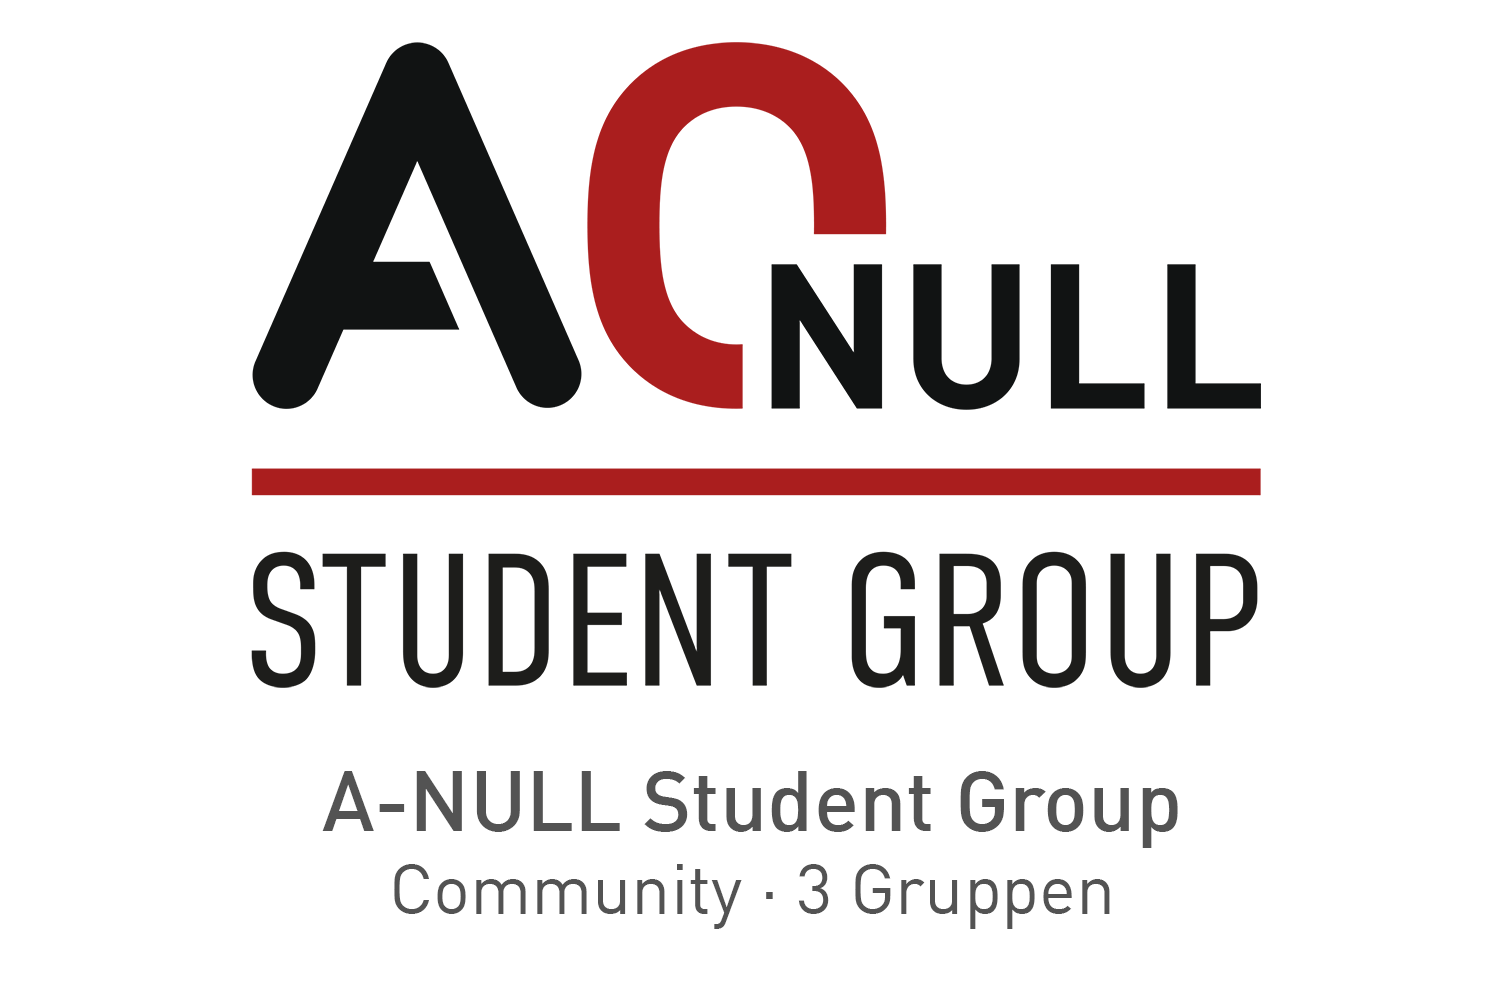 A-NULL Student Group Community